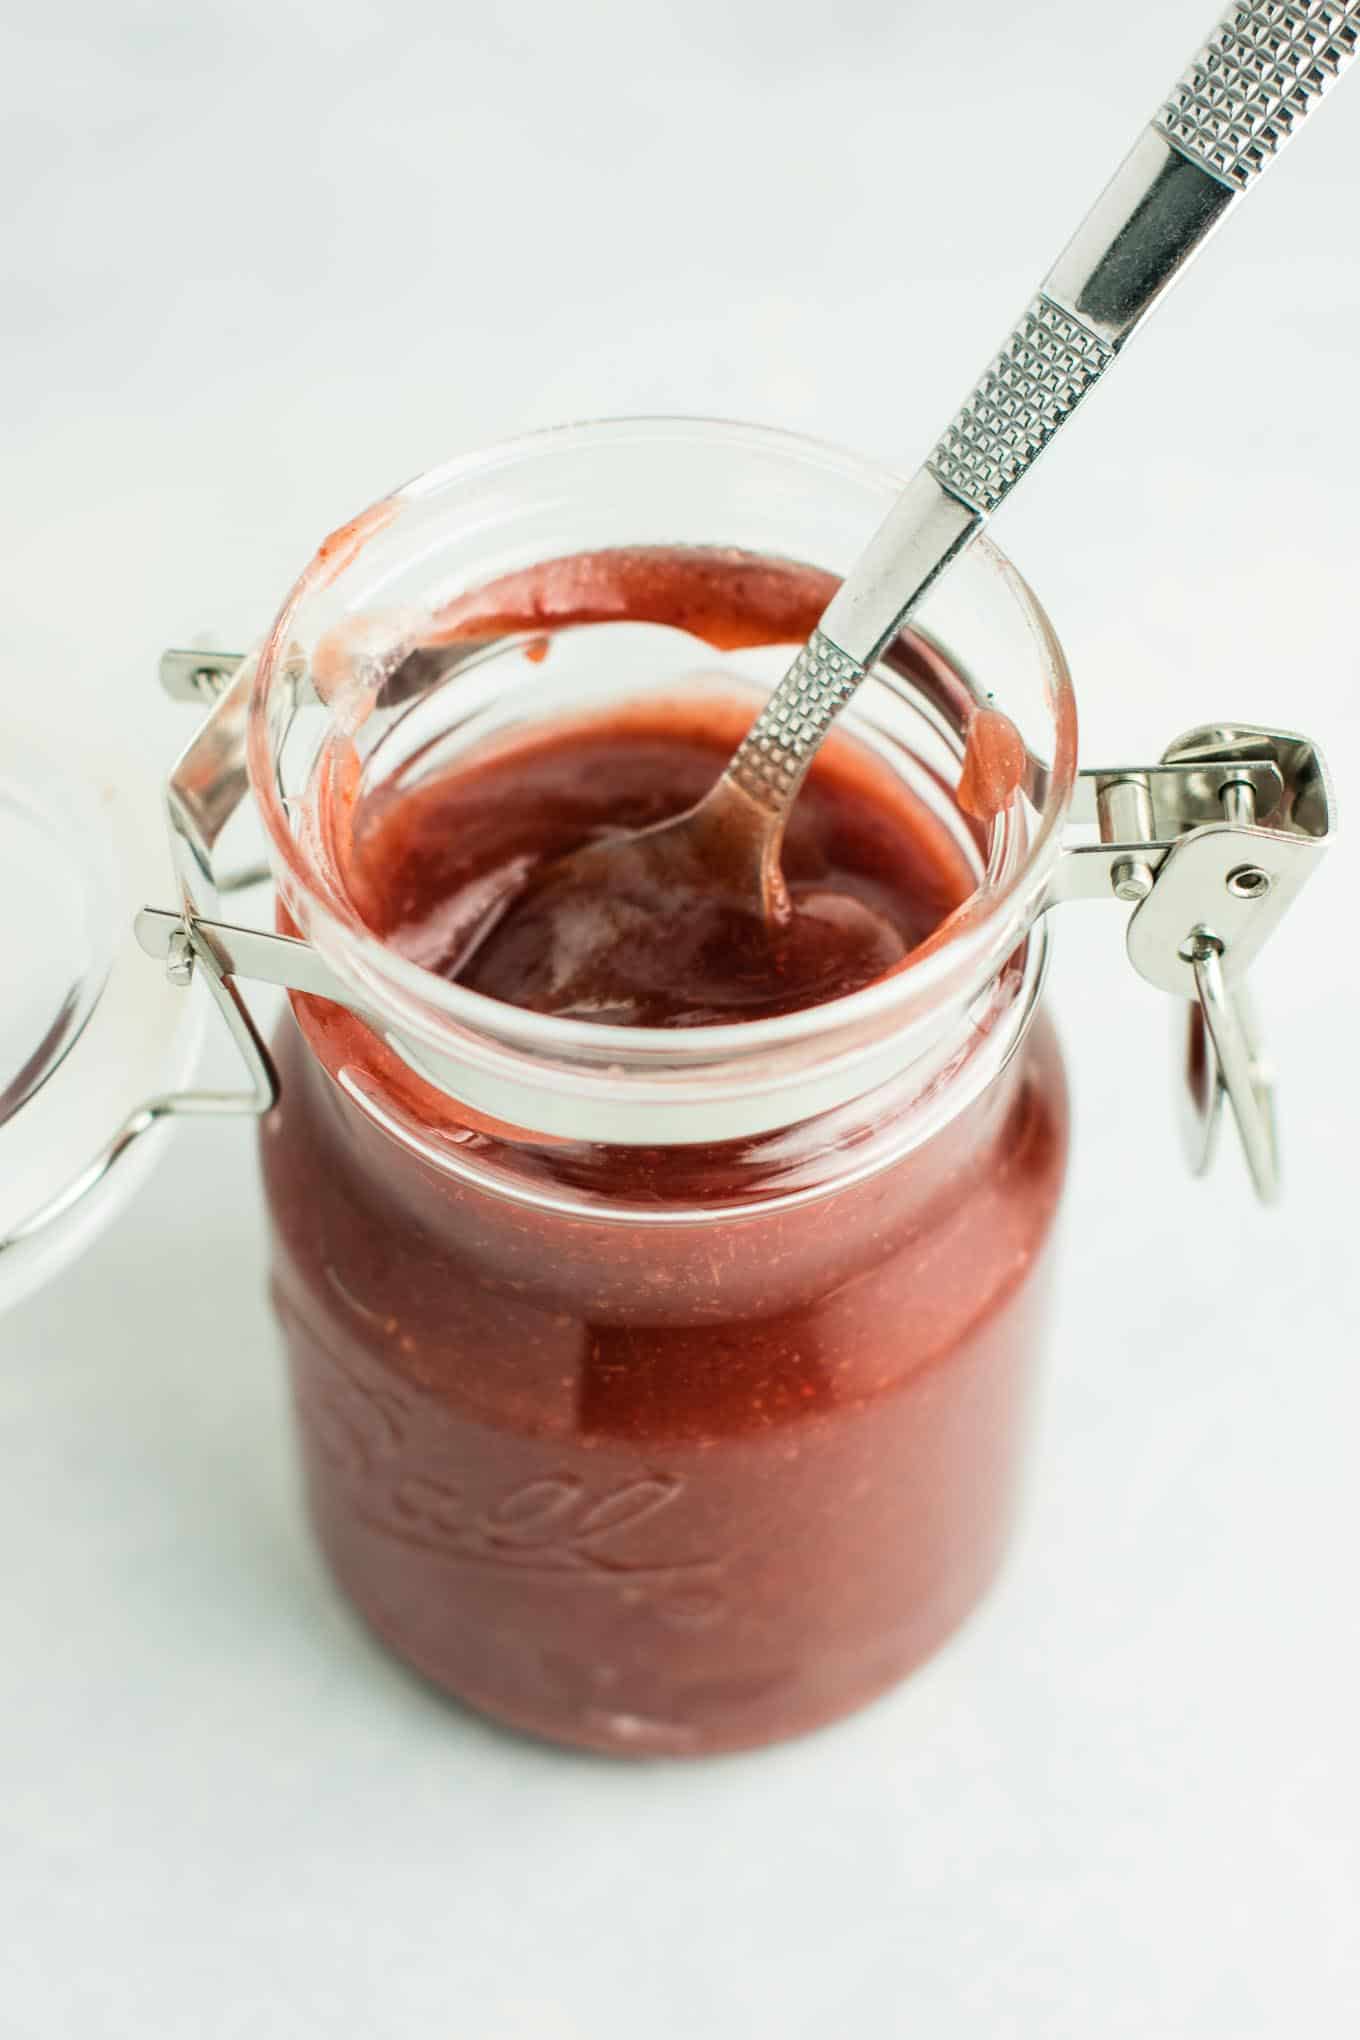 fresh cranberry recipes - Slow Cooker Cranberry Apple Butter recipe made with just 4 ingredients. Your house will smell amazing while this cooks! (vegan, gluten free, naturally sweetened) #cranberryapplebutter #slowcooker #crockpot #vegan #glutenfree